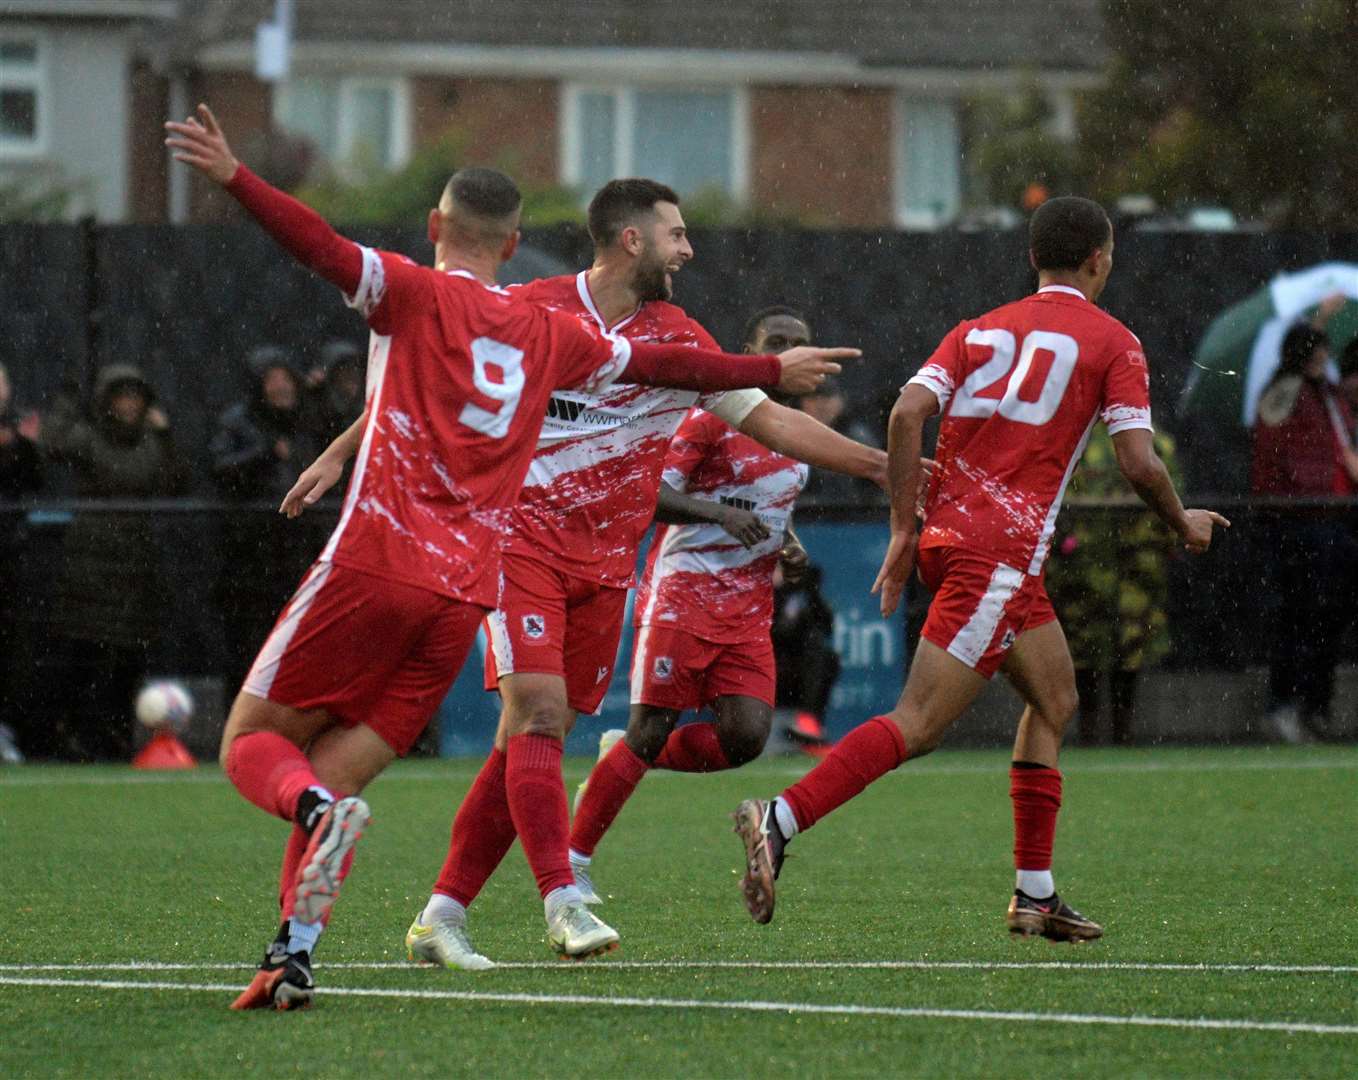 Delight for Ramsgate and goalscorer TJ Jadama (No.20) after levelling against Woking. Picture: Barry Goodwin